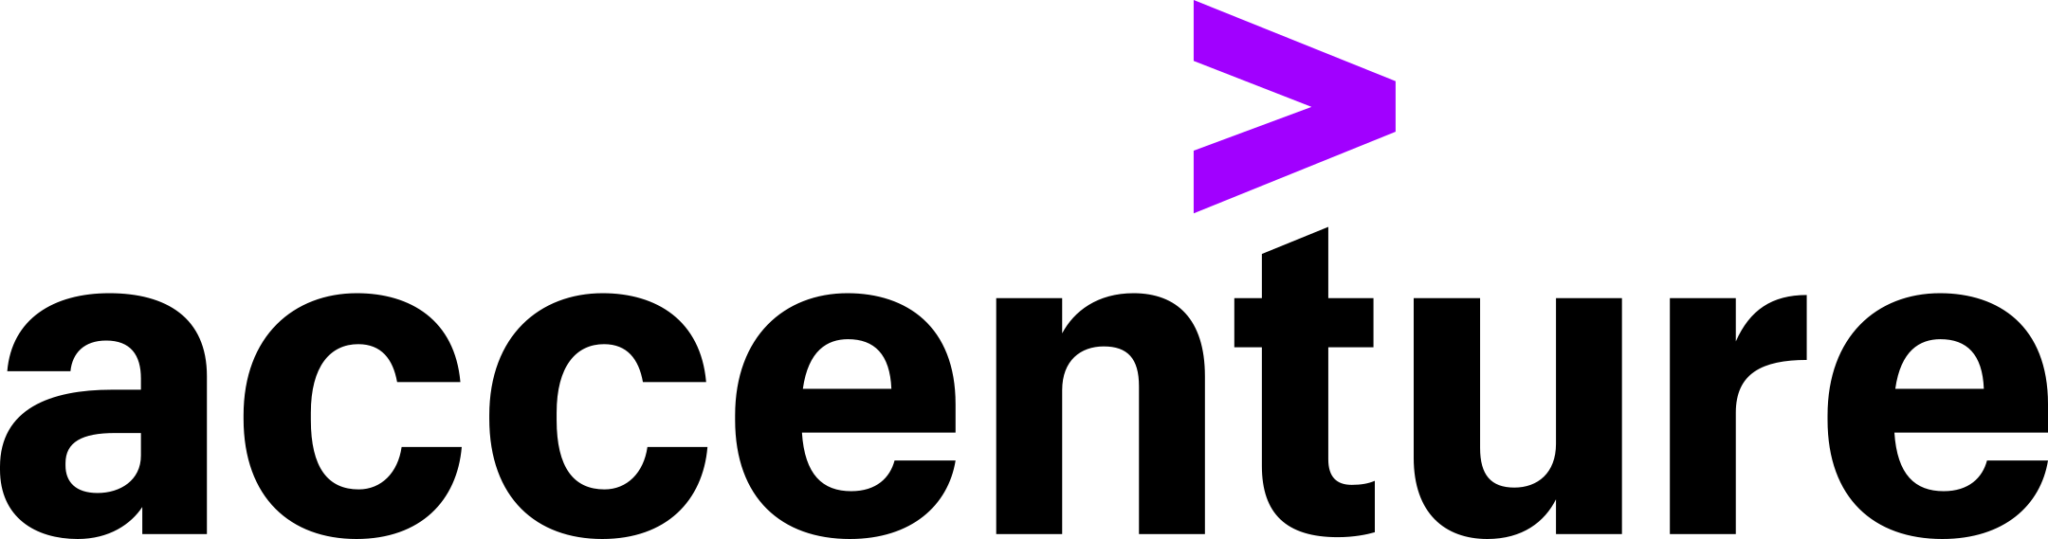 accenture-logo-1-1.png